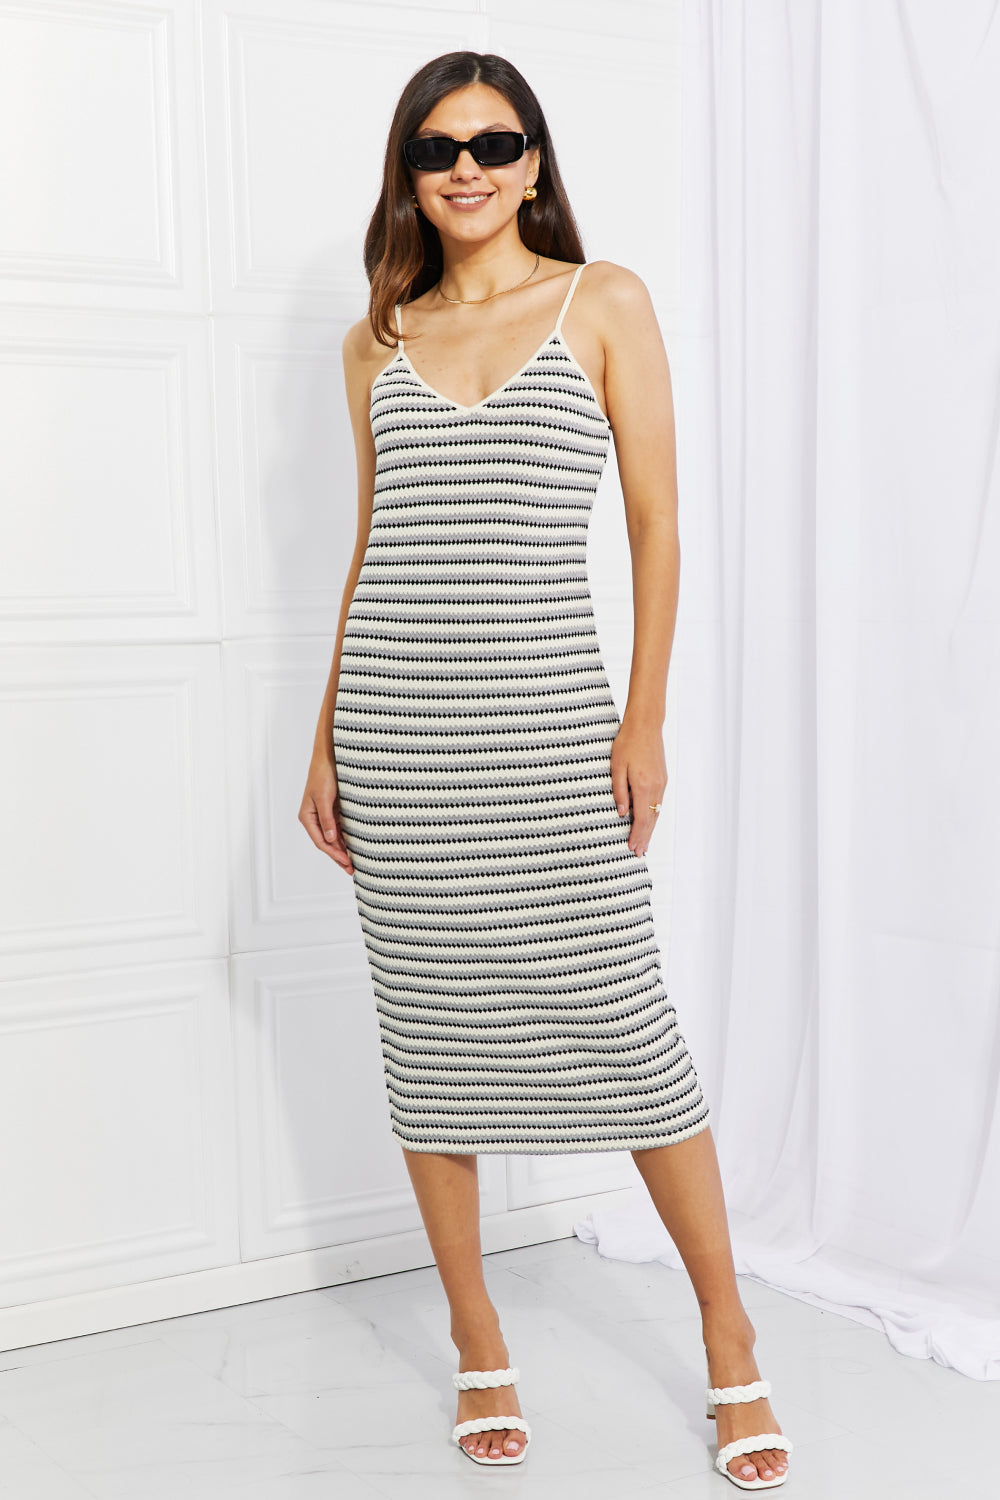 One to Remember Striped Sleeveless Midi Dress - Multicolor / S - All Dresses - Dresses - 1 - 2024